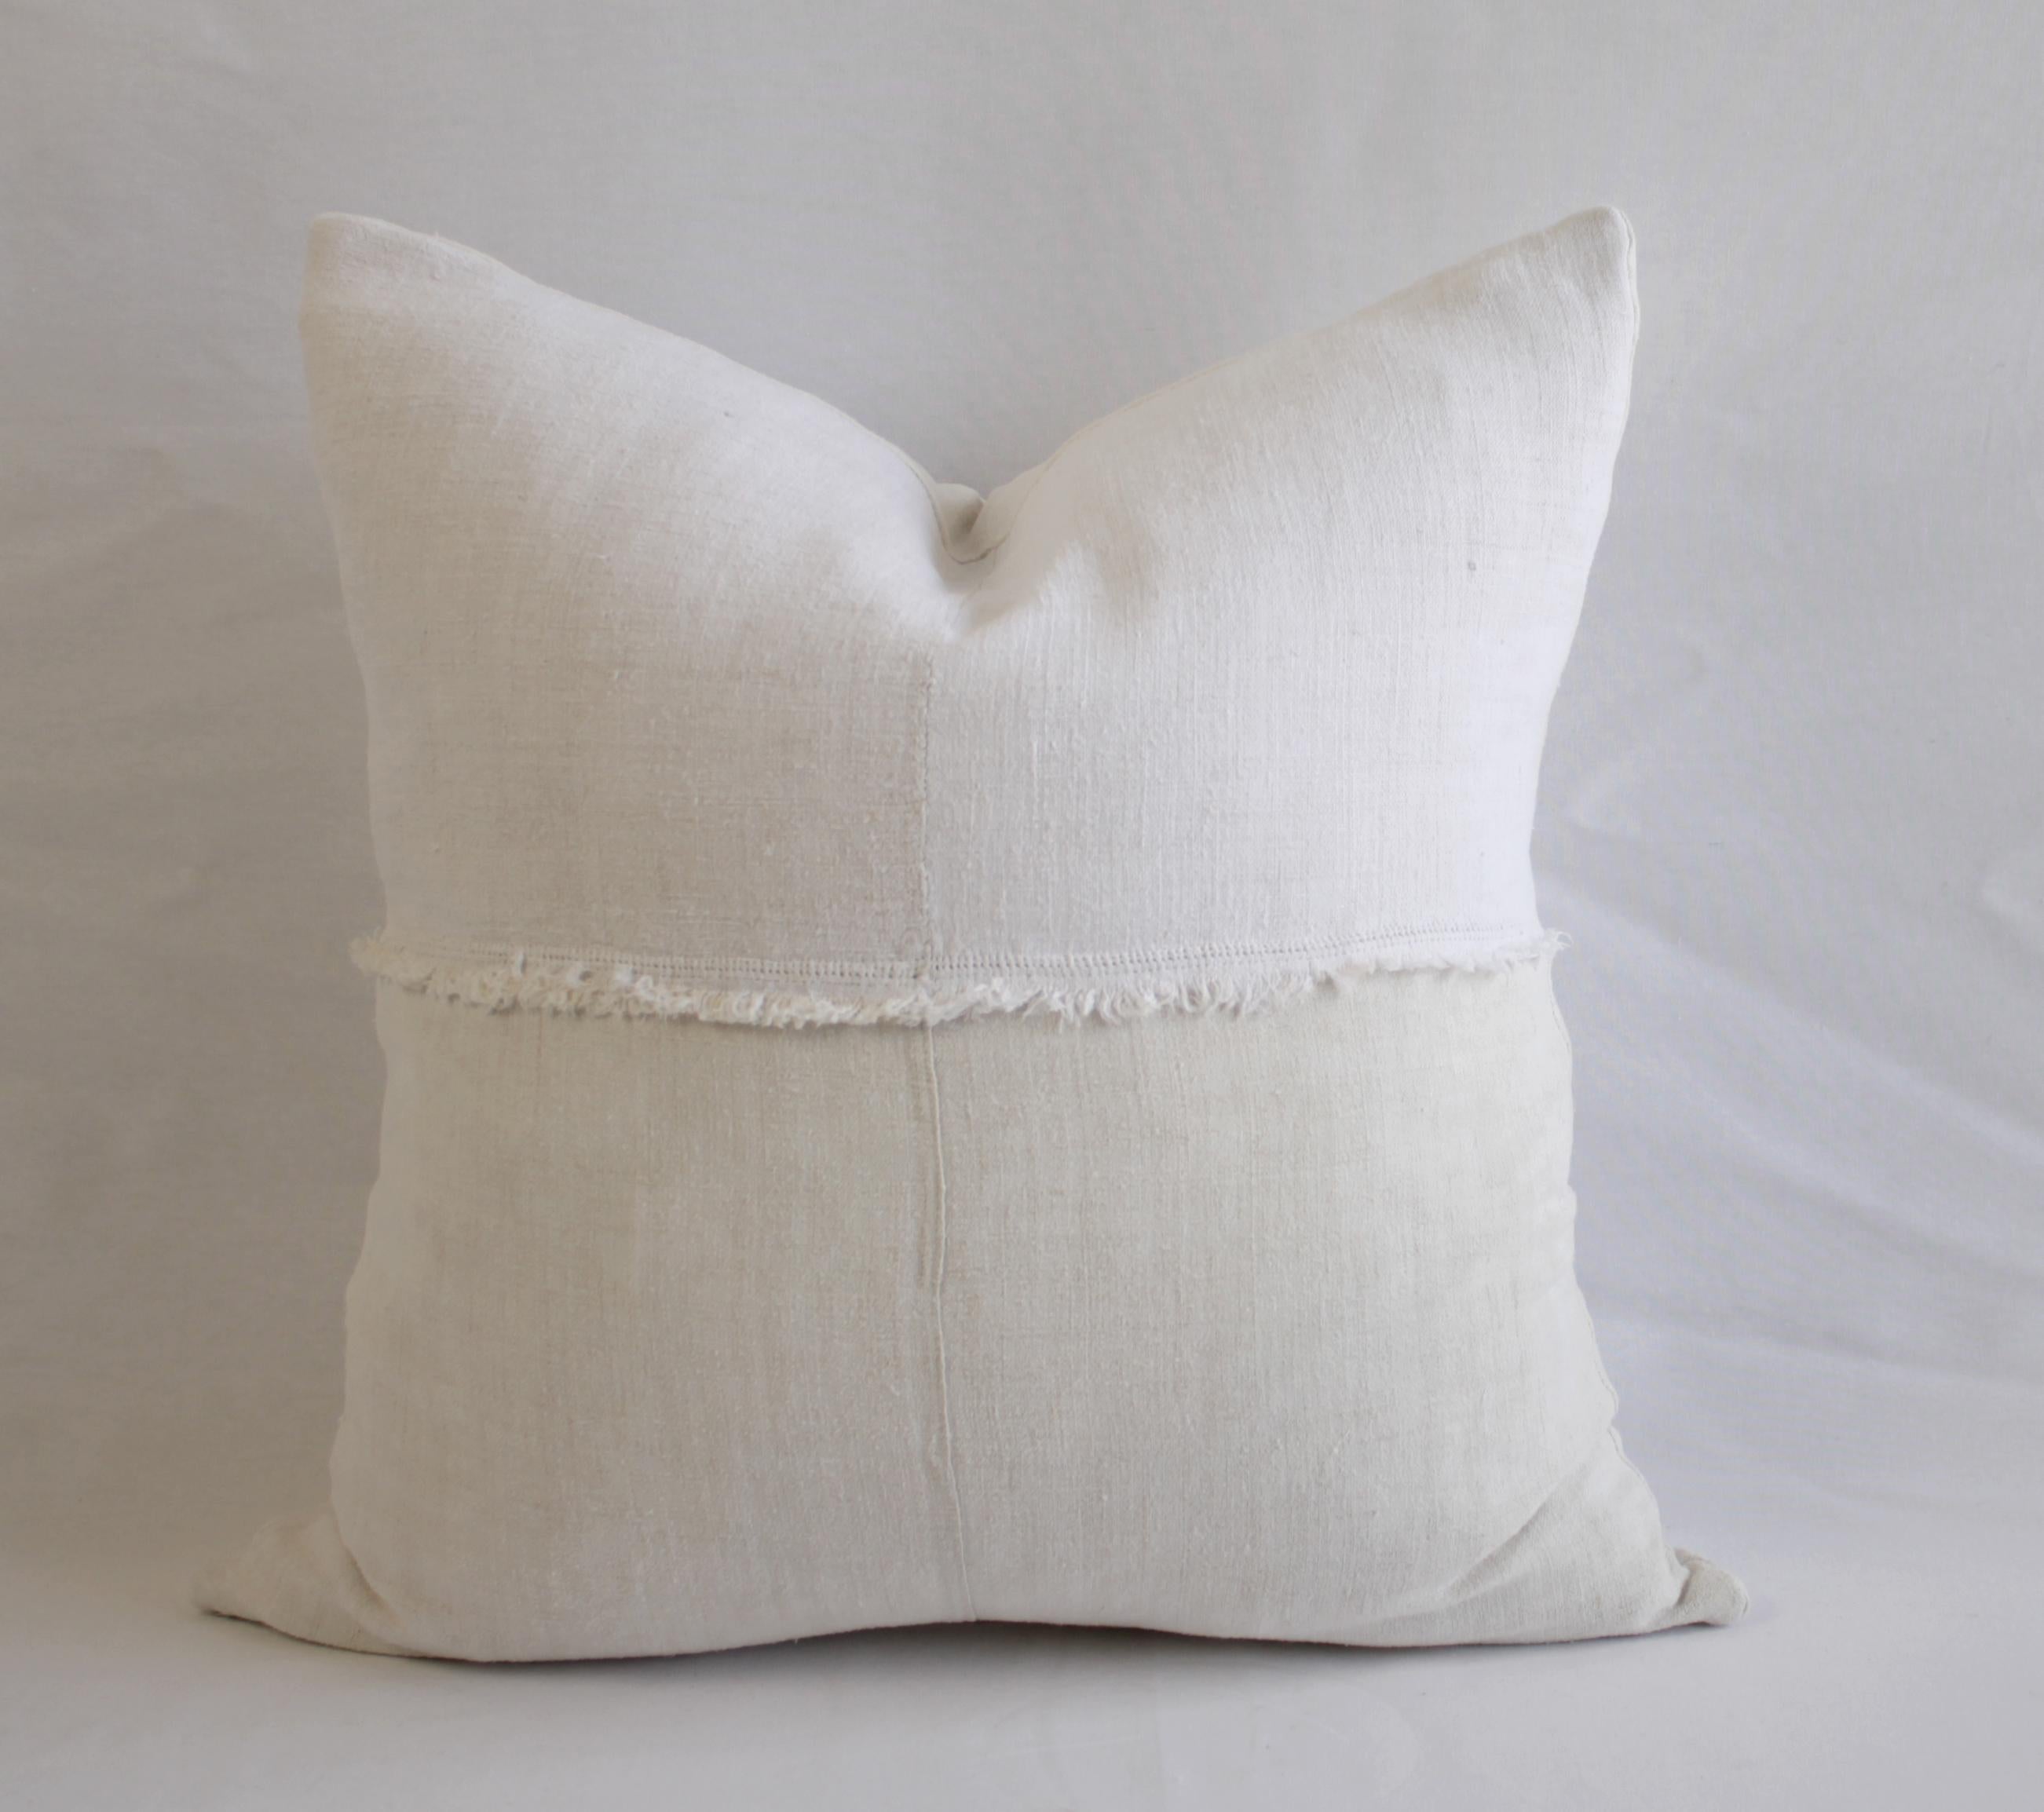 French linen pillow in off white with fray details.
Made from 19th century French linens. This is a two tone off white, the top portion is a soft white, the bottom face is a creamy white. The fray detail is original to the linen we found, there is